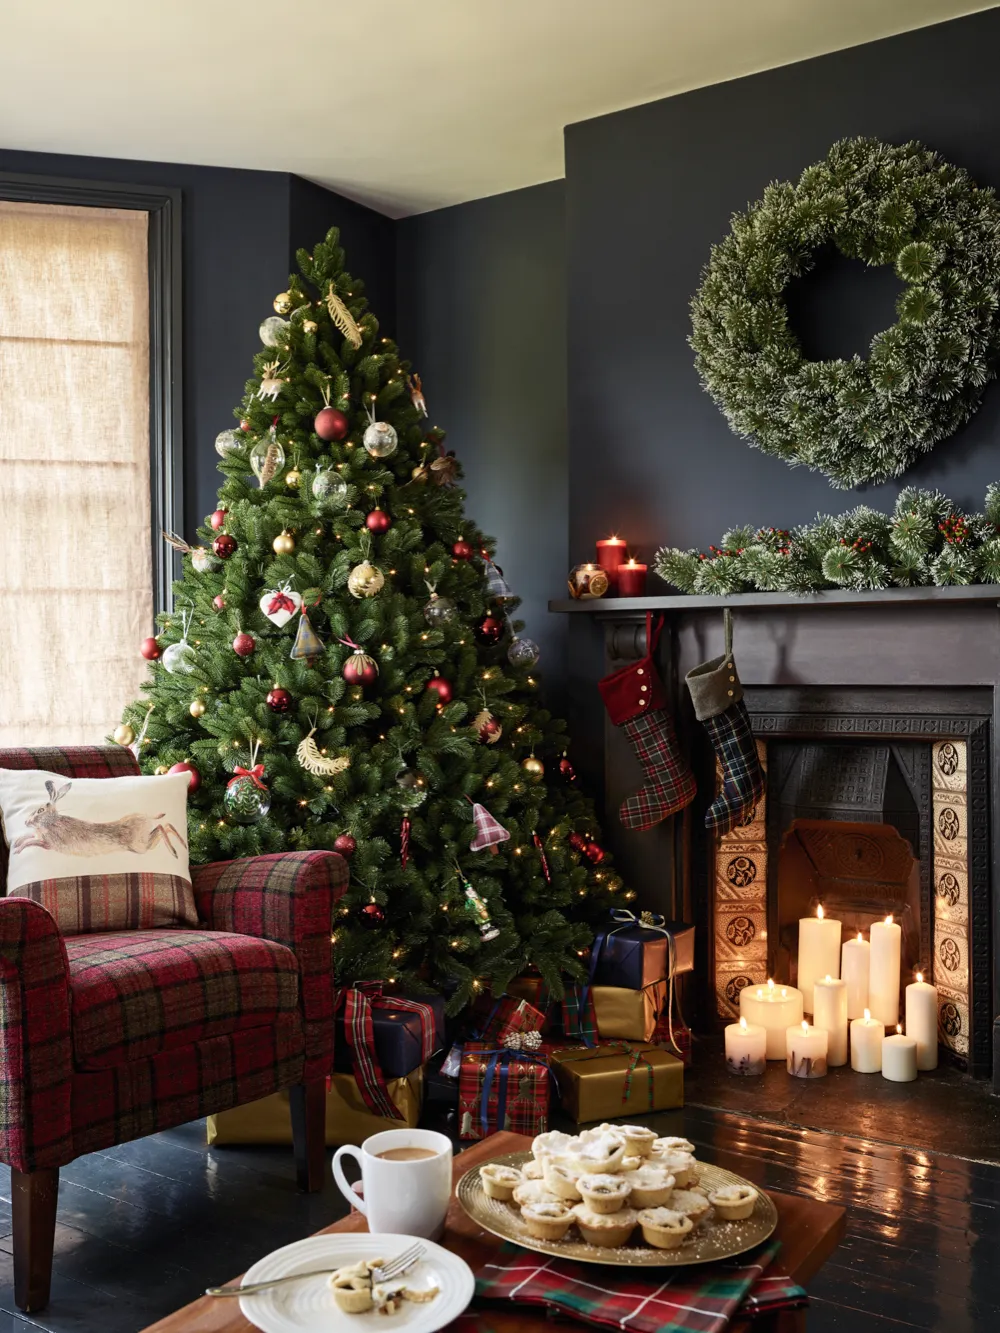 A large green Christmas tree stands next to a fireplace lit with pillar candles. Red and gold decorations fill the tree. Layered with traditional tartan this classic look oozes comfort and class